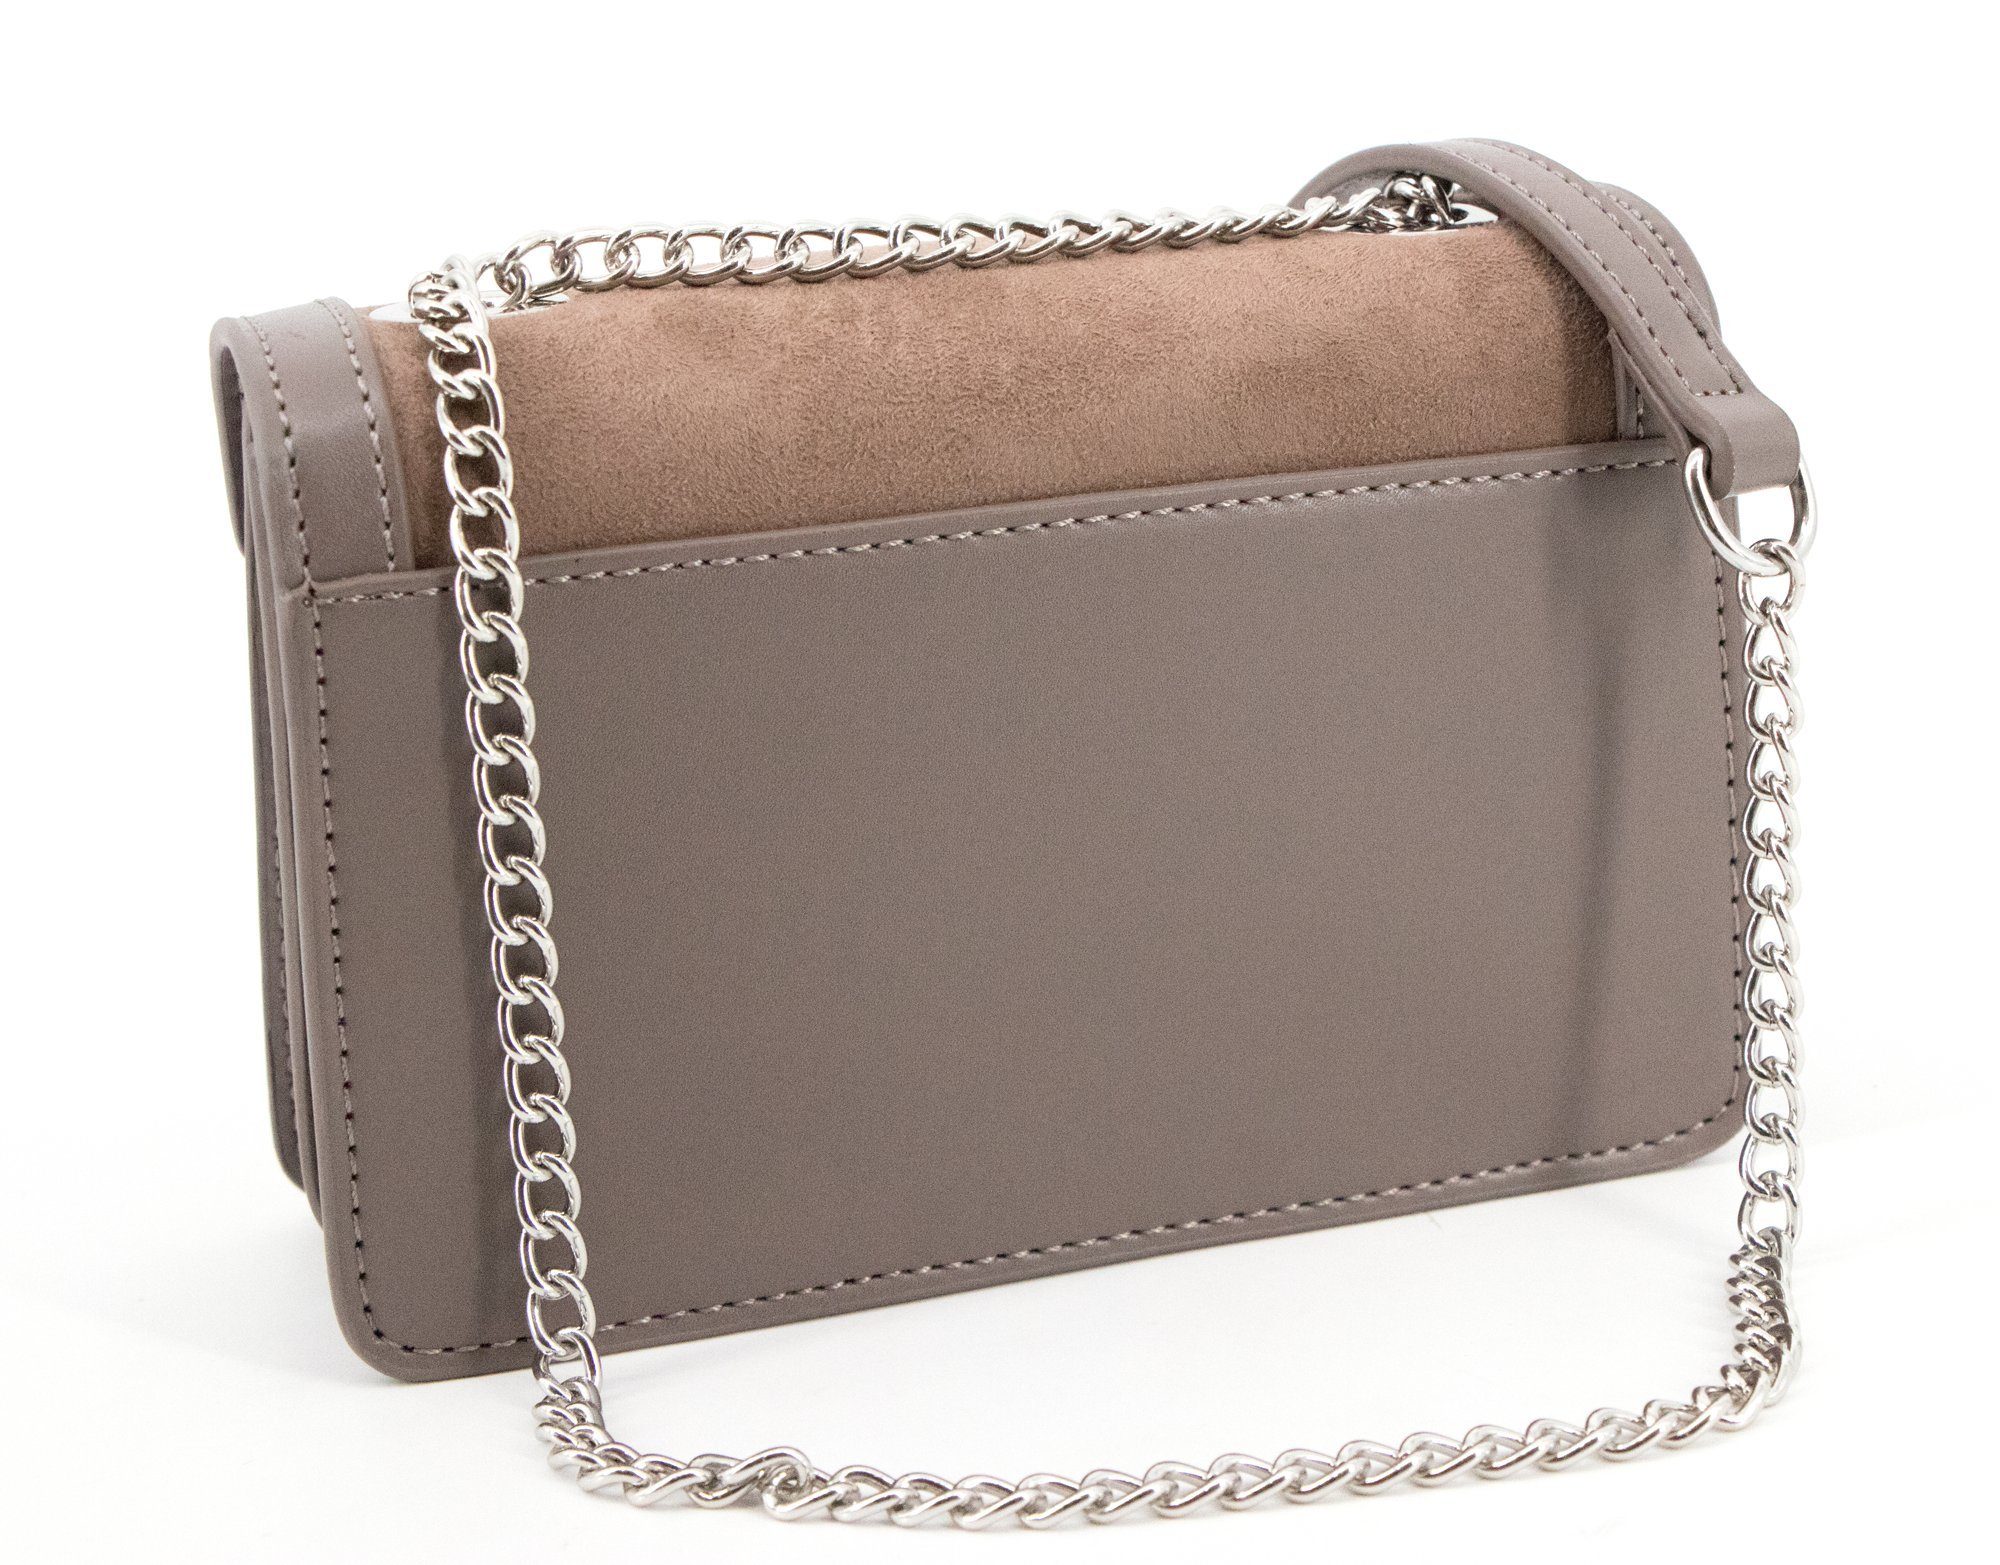 Tasso Valentino - TAUPE BAGS Bags VALENTINO Crossbody VBS5PD02 Umhängetasche